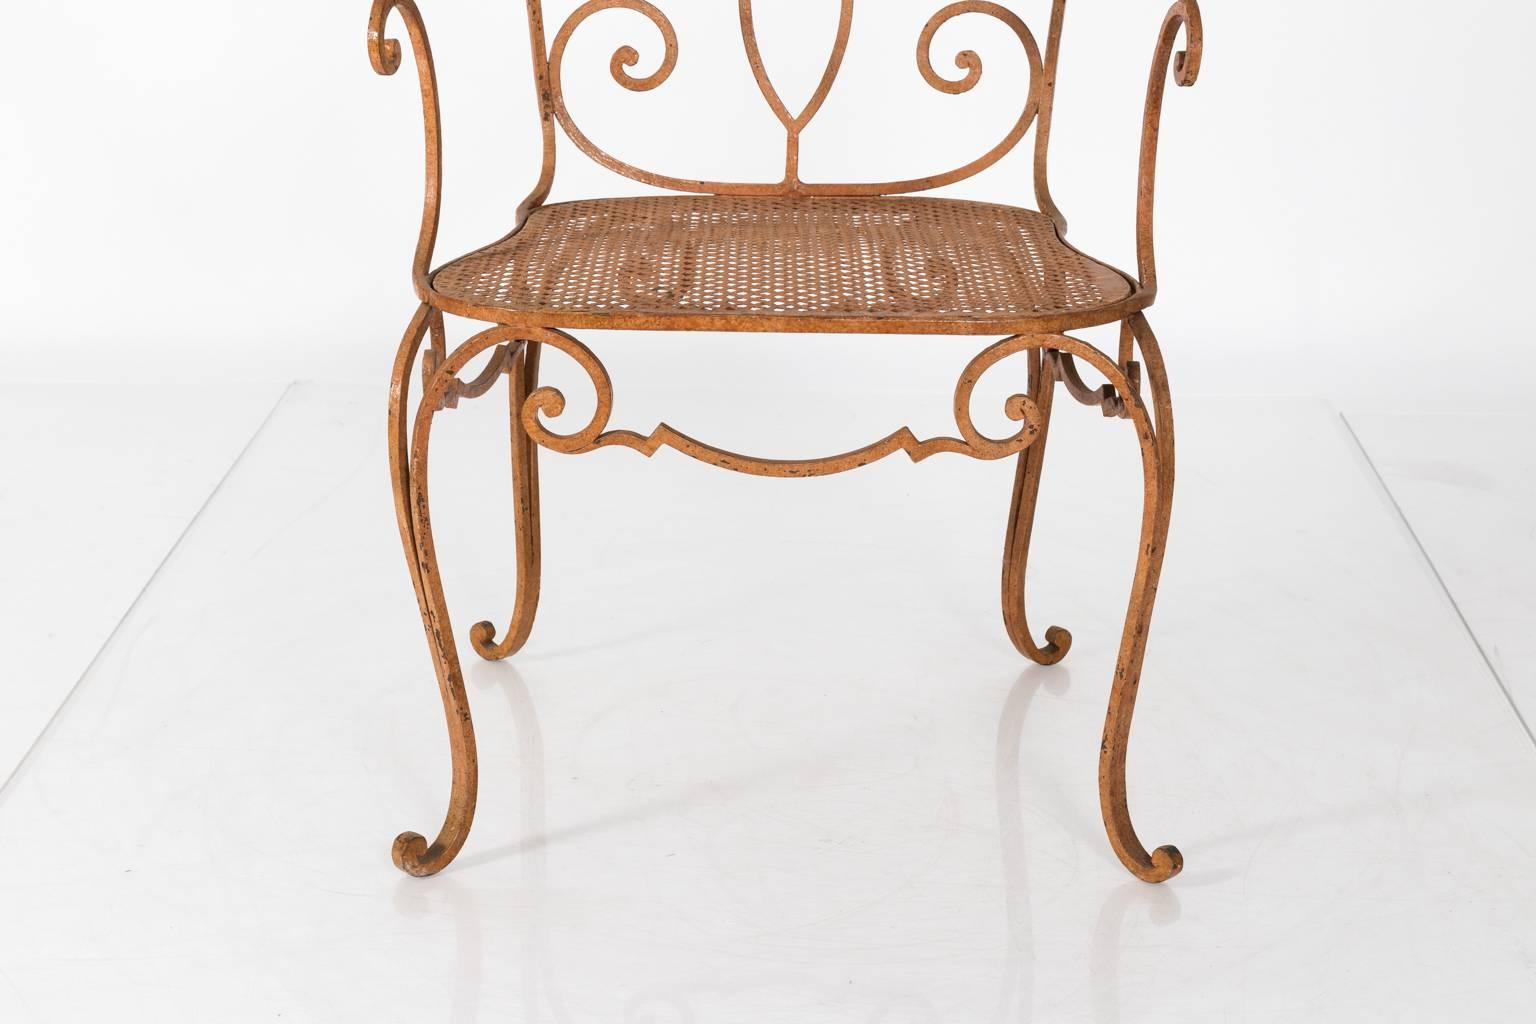 Pair of Jean Charles Moreaux garden chairs in wrought iron, circa 1940.
  